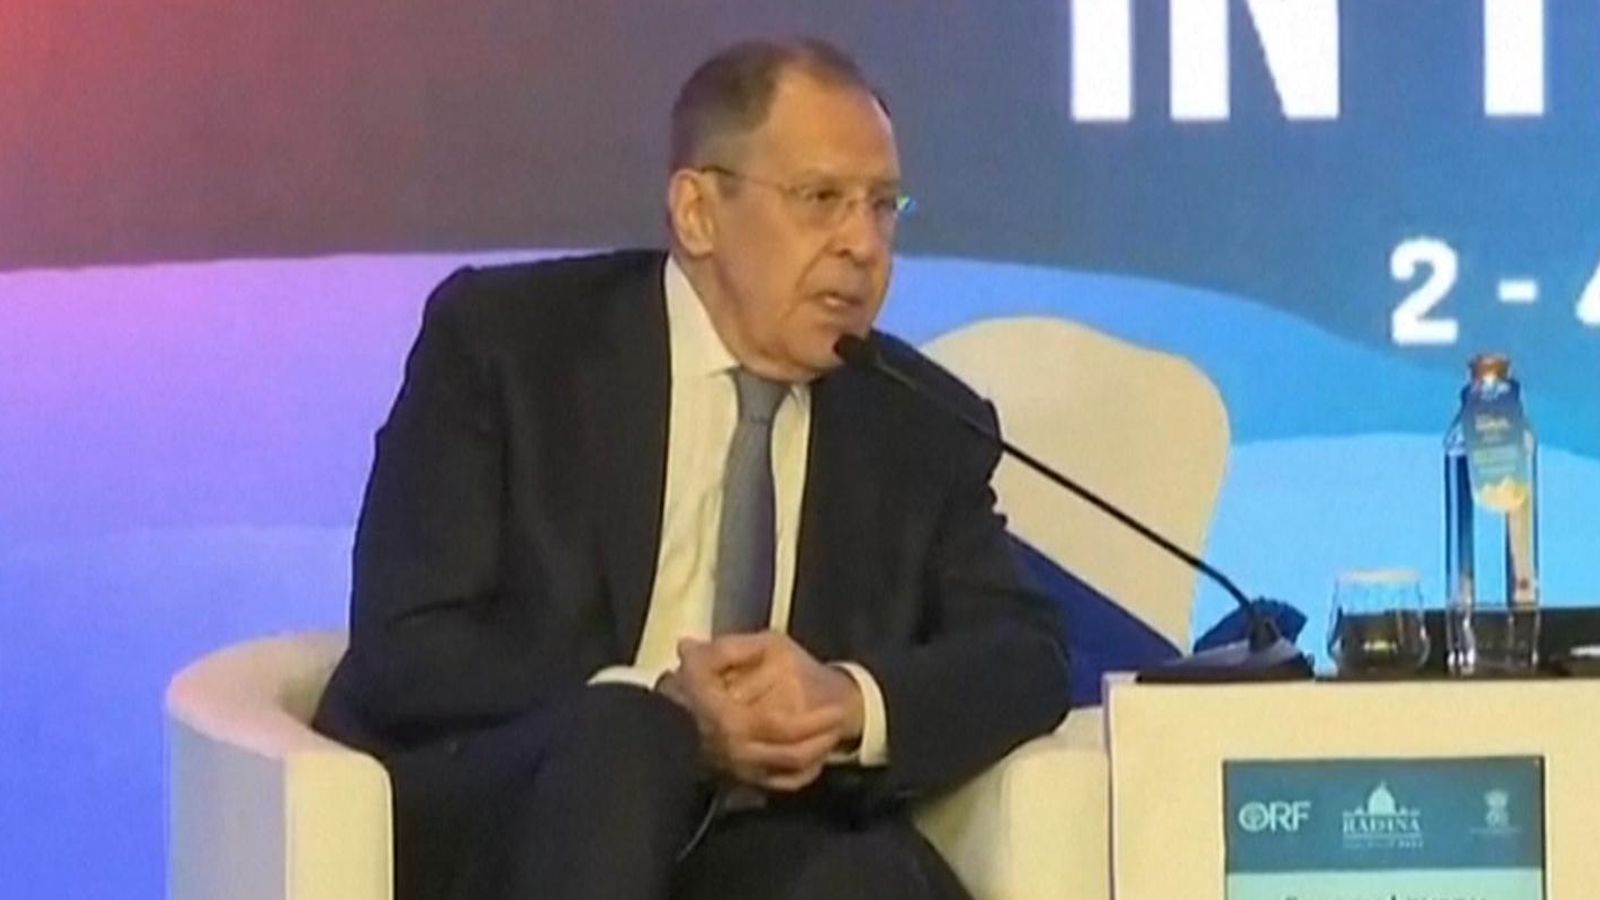 Russian diplomat Sergei Lavrov provokes laughter with claim his country is victim in Ukraine war